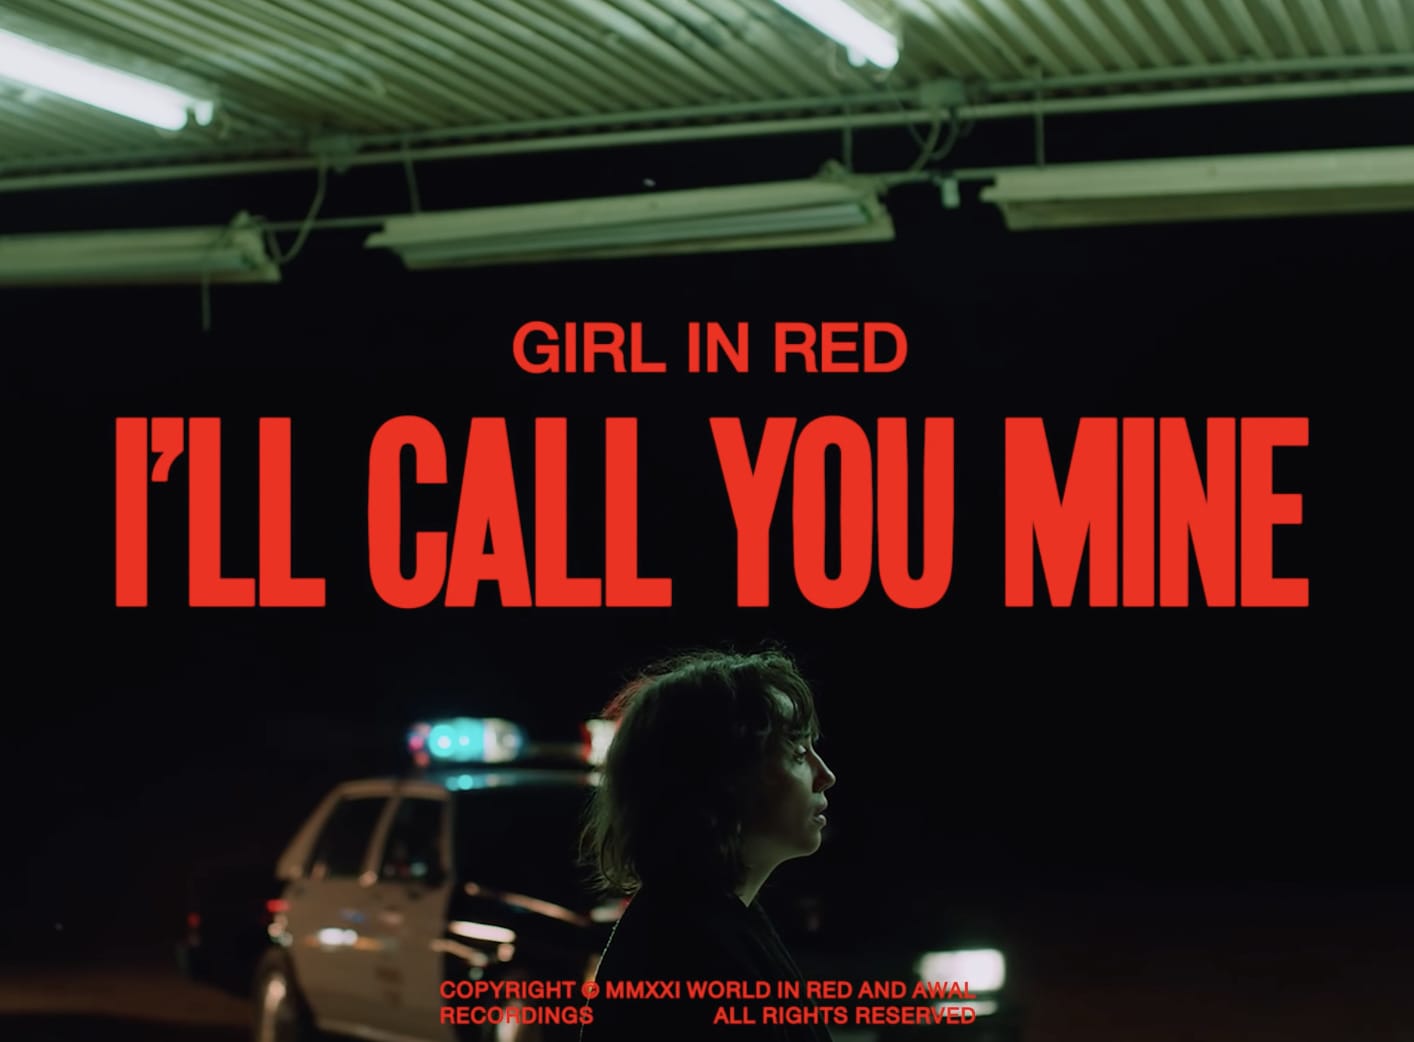 Girl in red : "I'll Call You Mine", un clip aux faux airs de "Thelma & Louise" 2